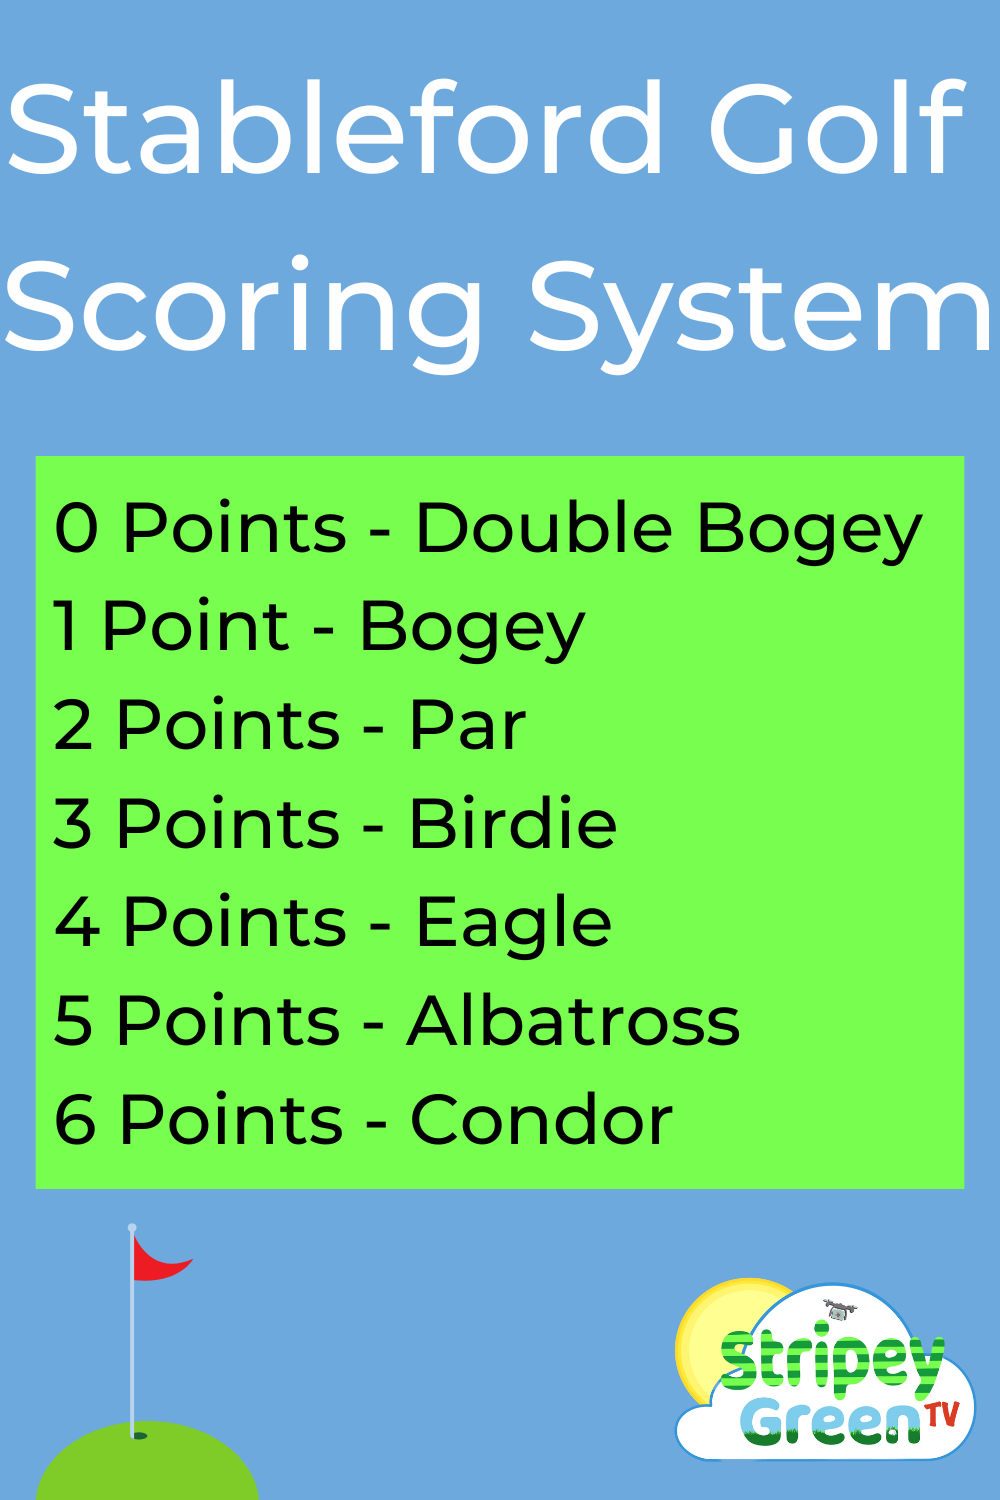 How to score golf Stableford Scoring System after removing the player's handicap on that hole